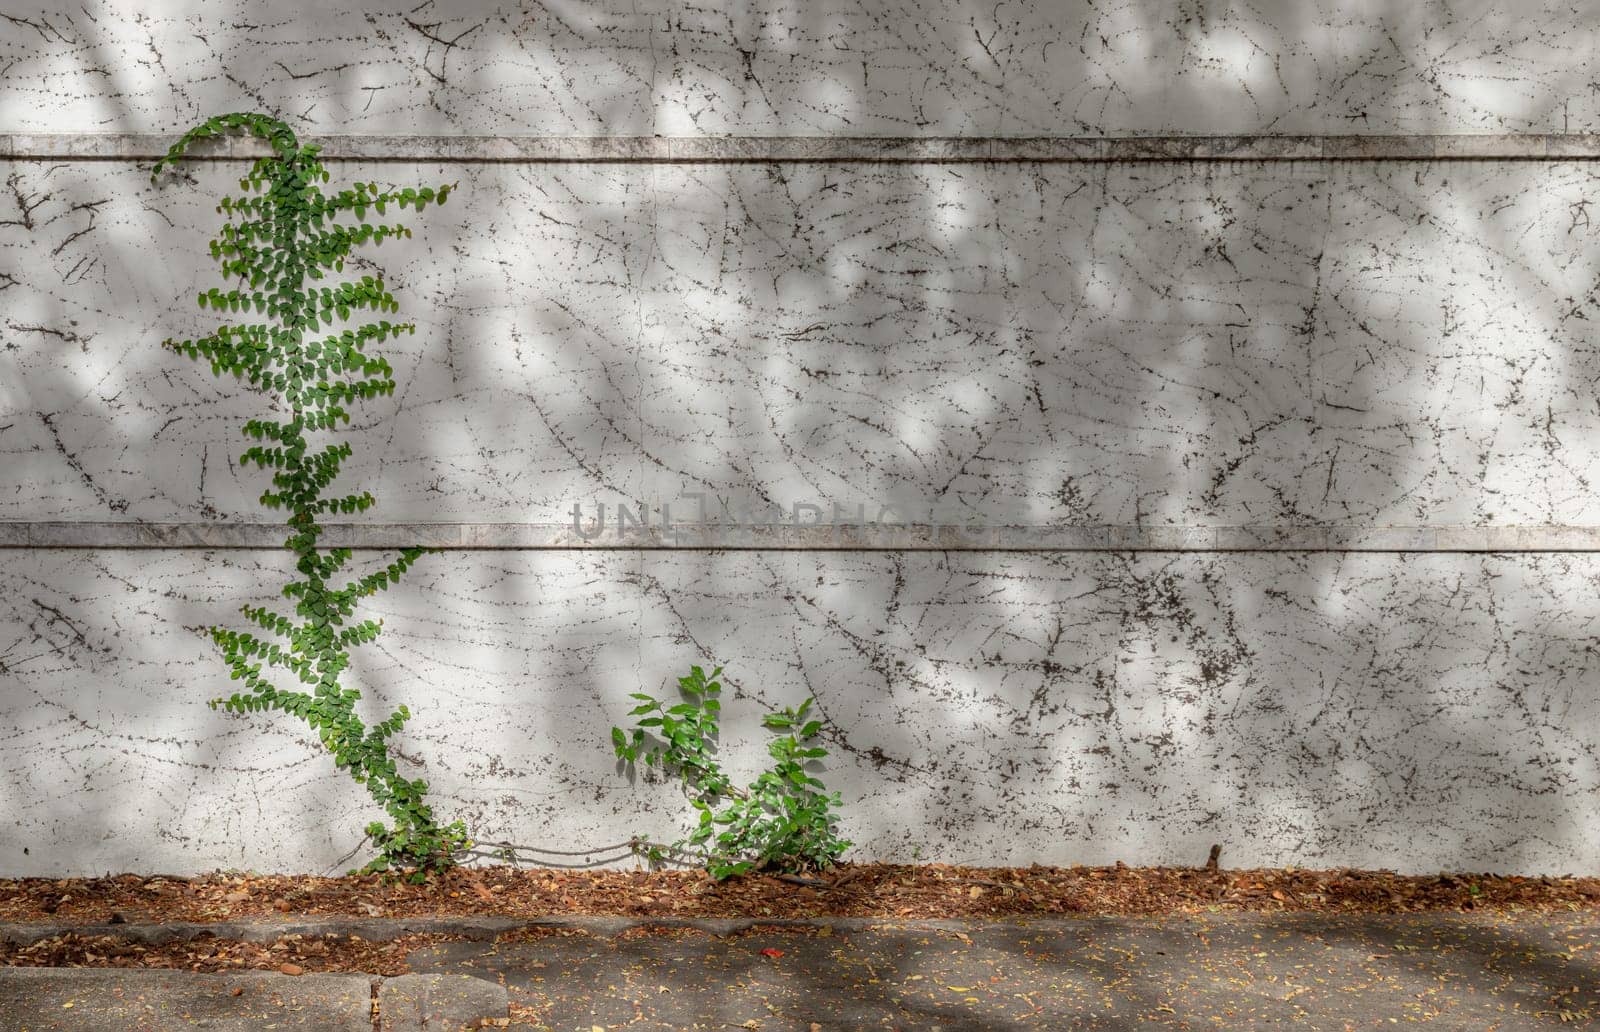 Climbing fig or Creeping fig (Ficus Pumila) the ivy plants are creeping up on whitewashed cement surface background. Green leaf texture and root branch growing on a white concrete wall background, Creeper plant, Green vine or liana, Nature plant wallpaper, Space for text, Selective focus.